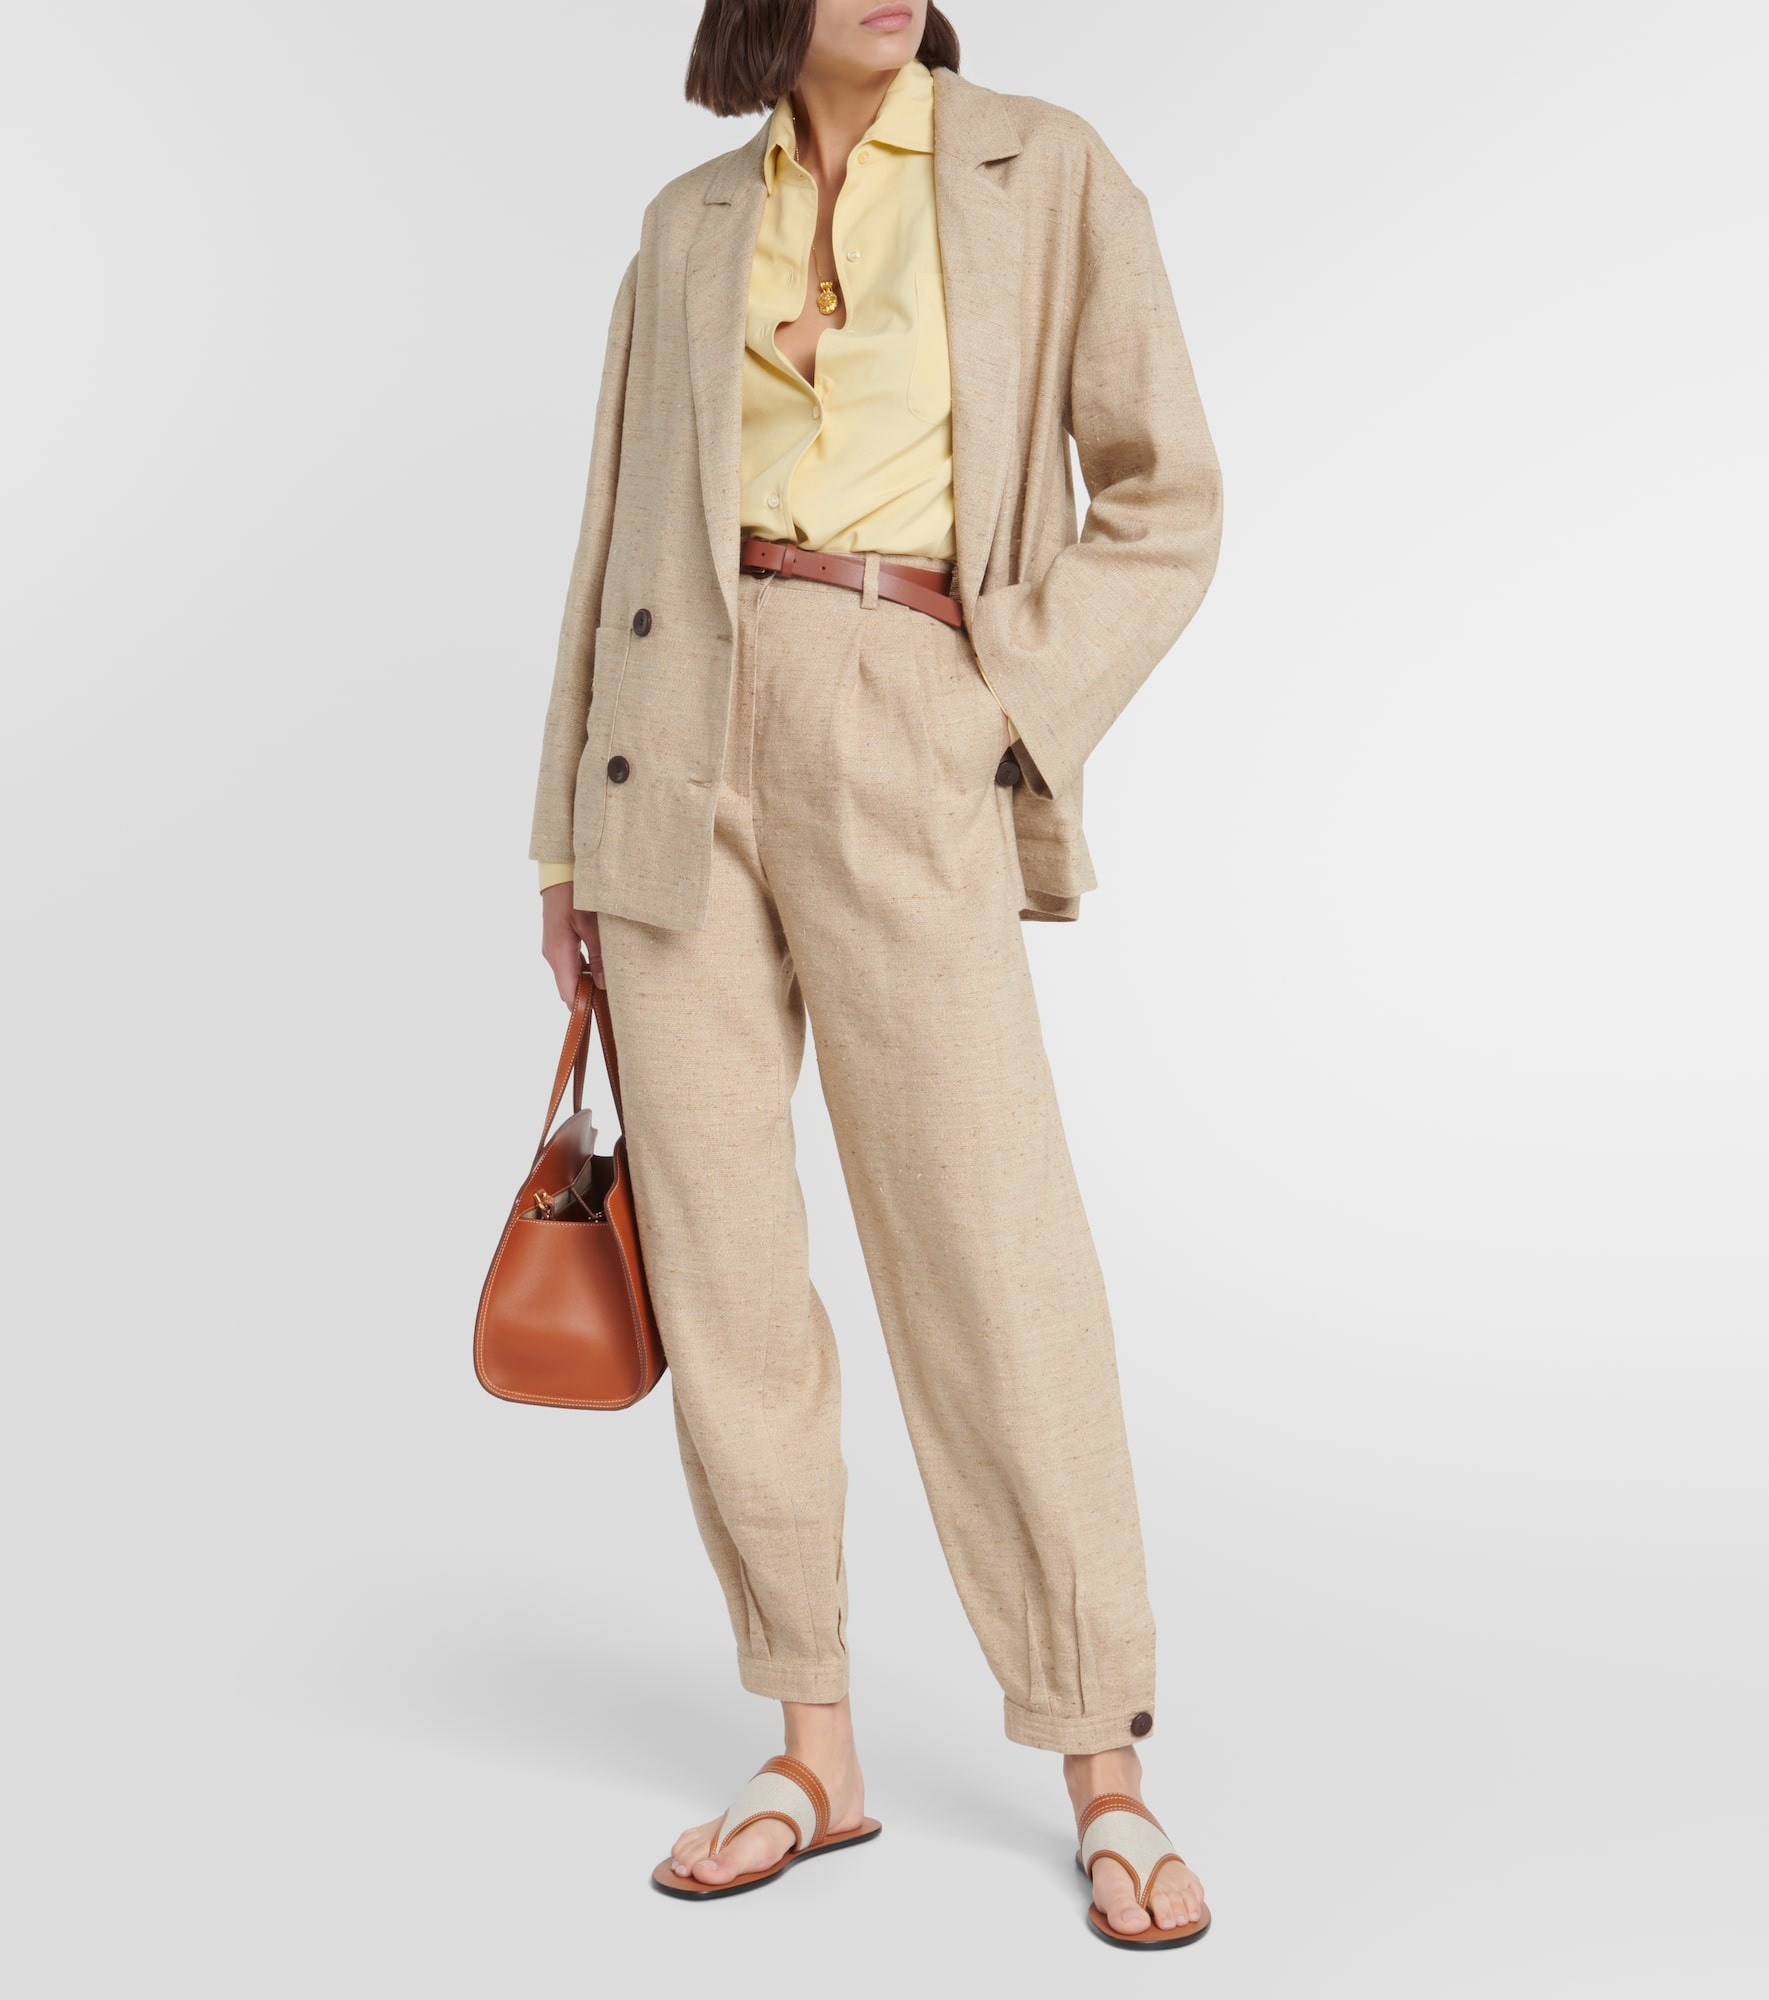 Linen, cashmere, and silk pants - 2